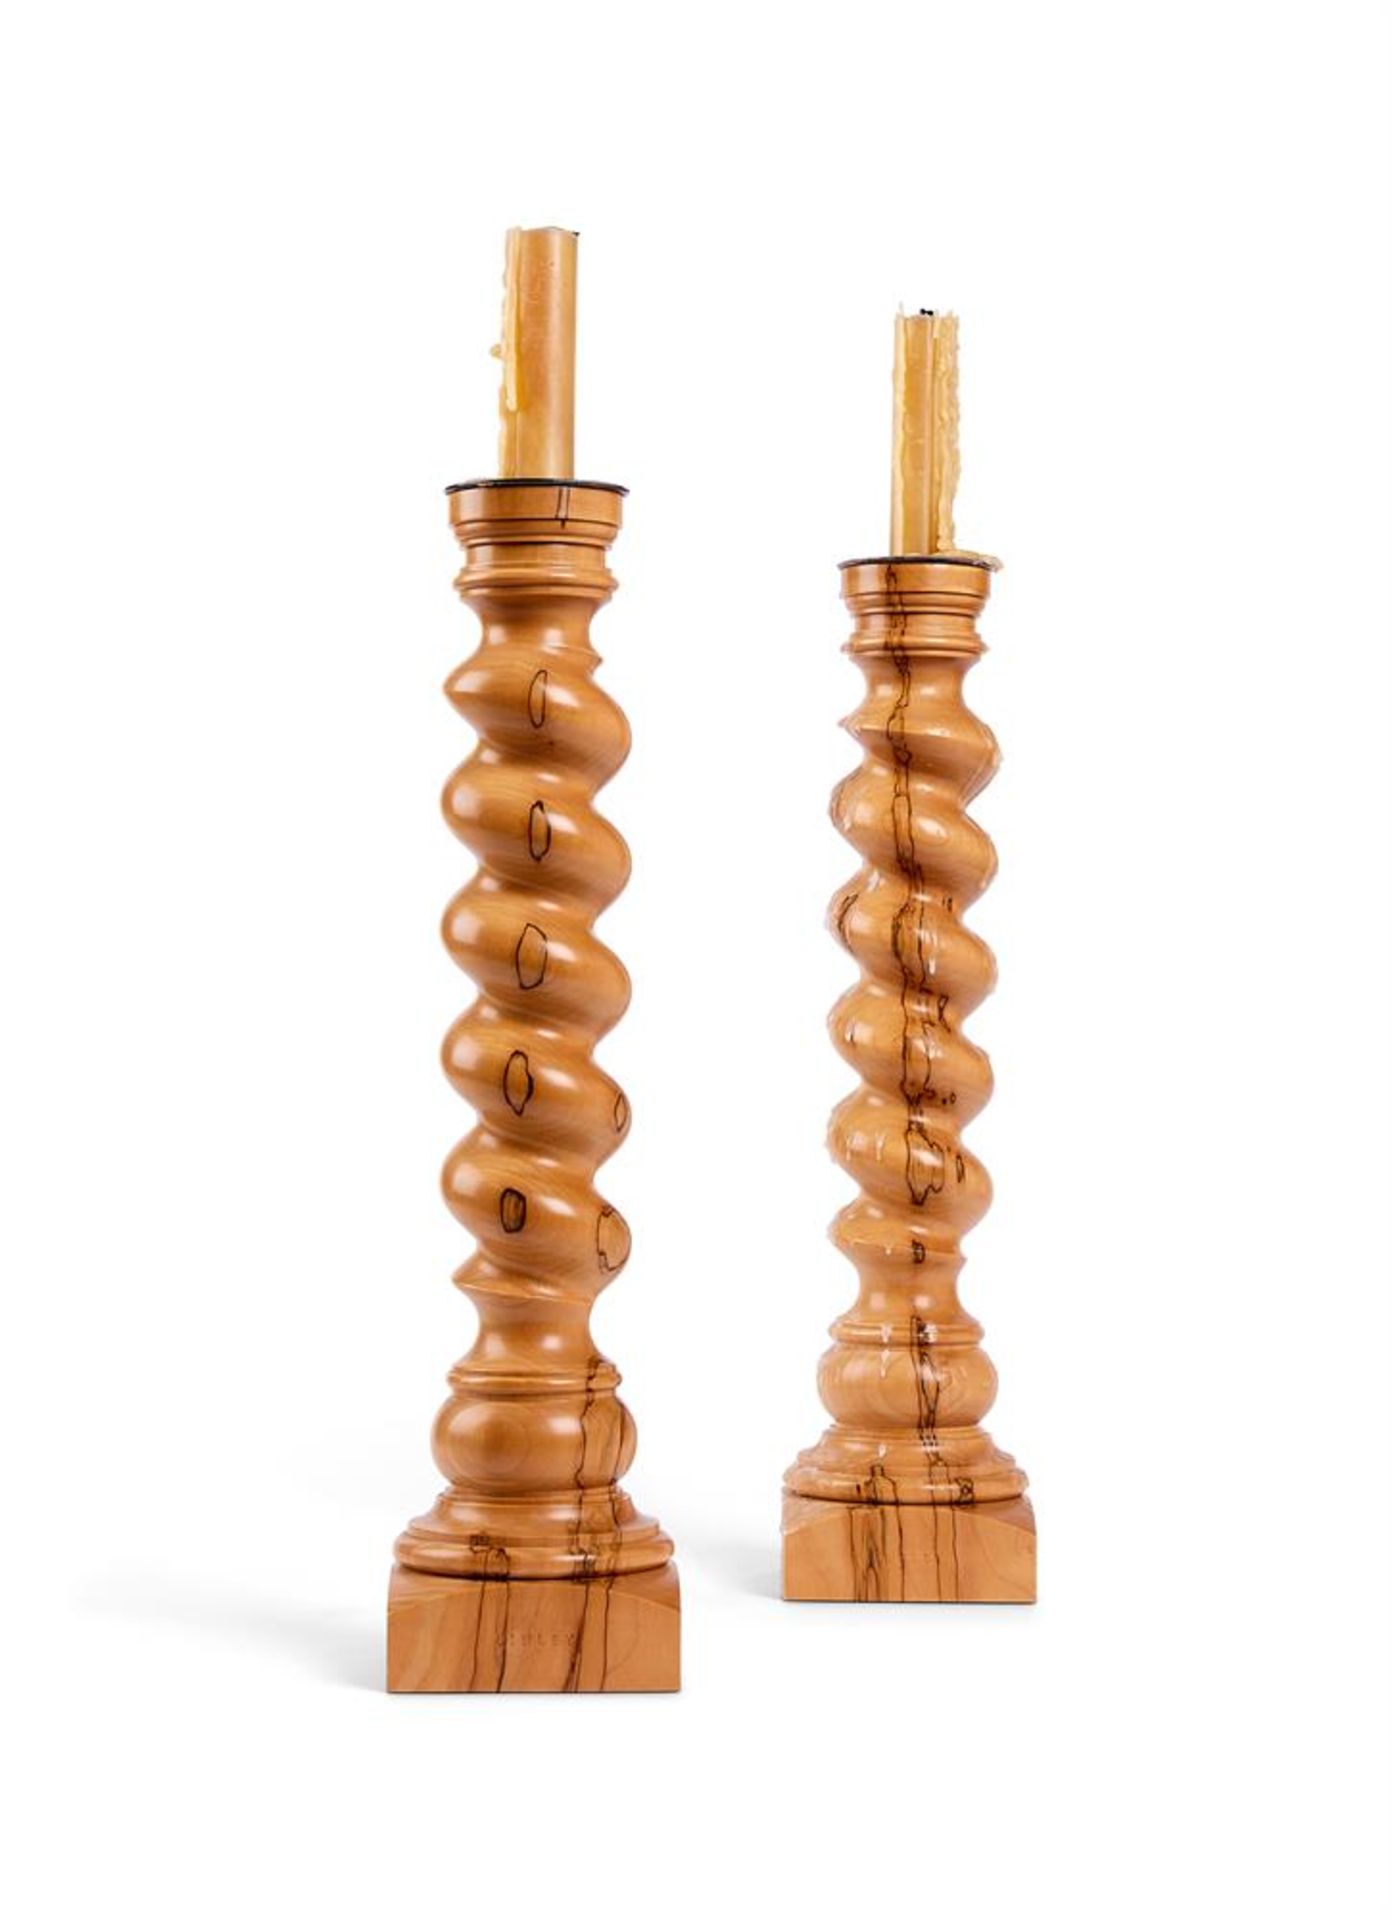 A PAIR OF SPALTED BEECH BARLEY TWIST CANDLESTICKS BY LINLEY